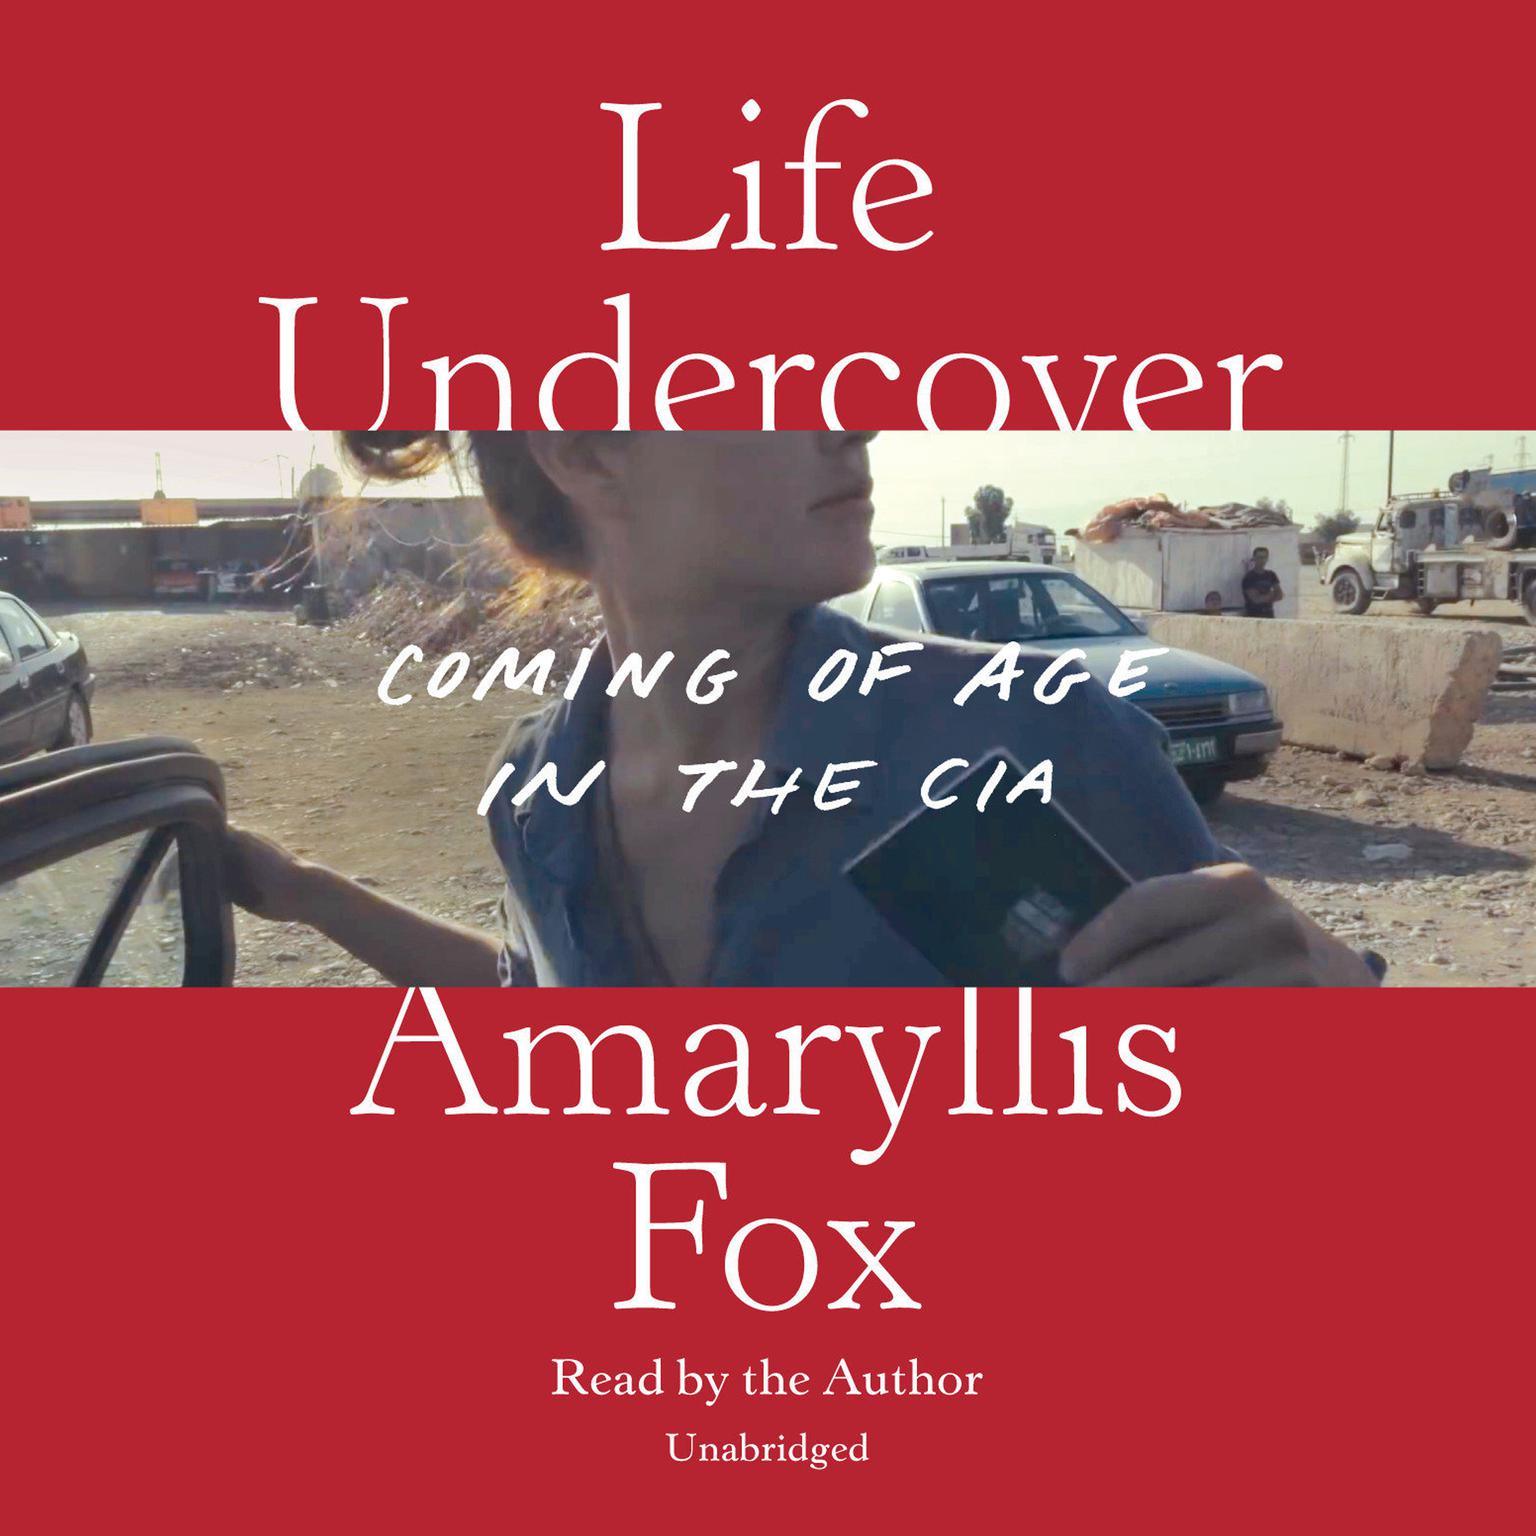 Life Undercover: Coming of Age in the CIA Audiobook, by Amaryllis Fox